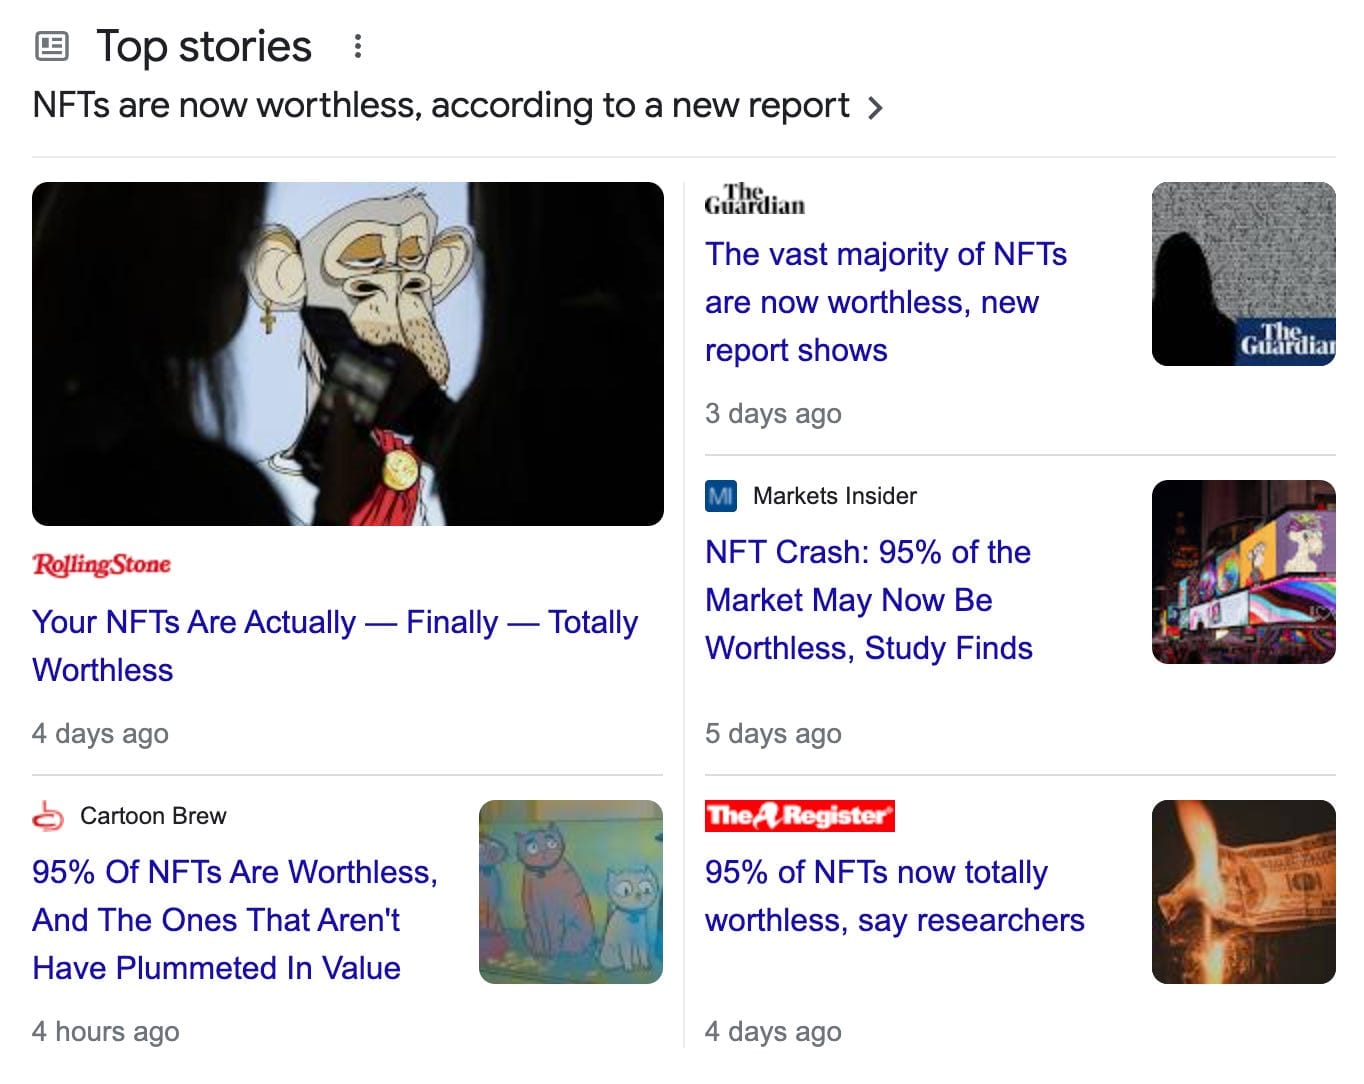 Google News search results: Top stories NFTs are now worthless, according to a new report  Rolling Stone Your NFTs Are Actually — Finally — Totally Worthless 4 days ago  The Guardian The vast majority of NFTs are now worthless, new report shows 3 days ago  Markets Insider NFT Crash: 95% of the Market May Now Be Worthless, Study Finds 5 days ago  Cartoon Brew 95% Of NFTs Are Worthless, And The Ones That Aren't Have Plummeted In Value 4 hours ago  Theregister 95% of NFTs now totally worthless, say researchers 4 days ago